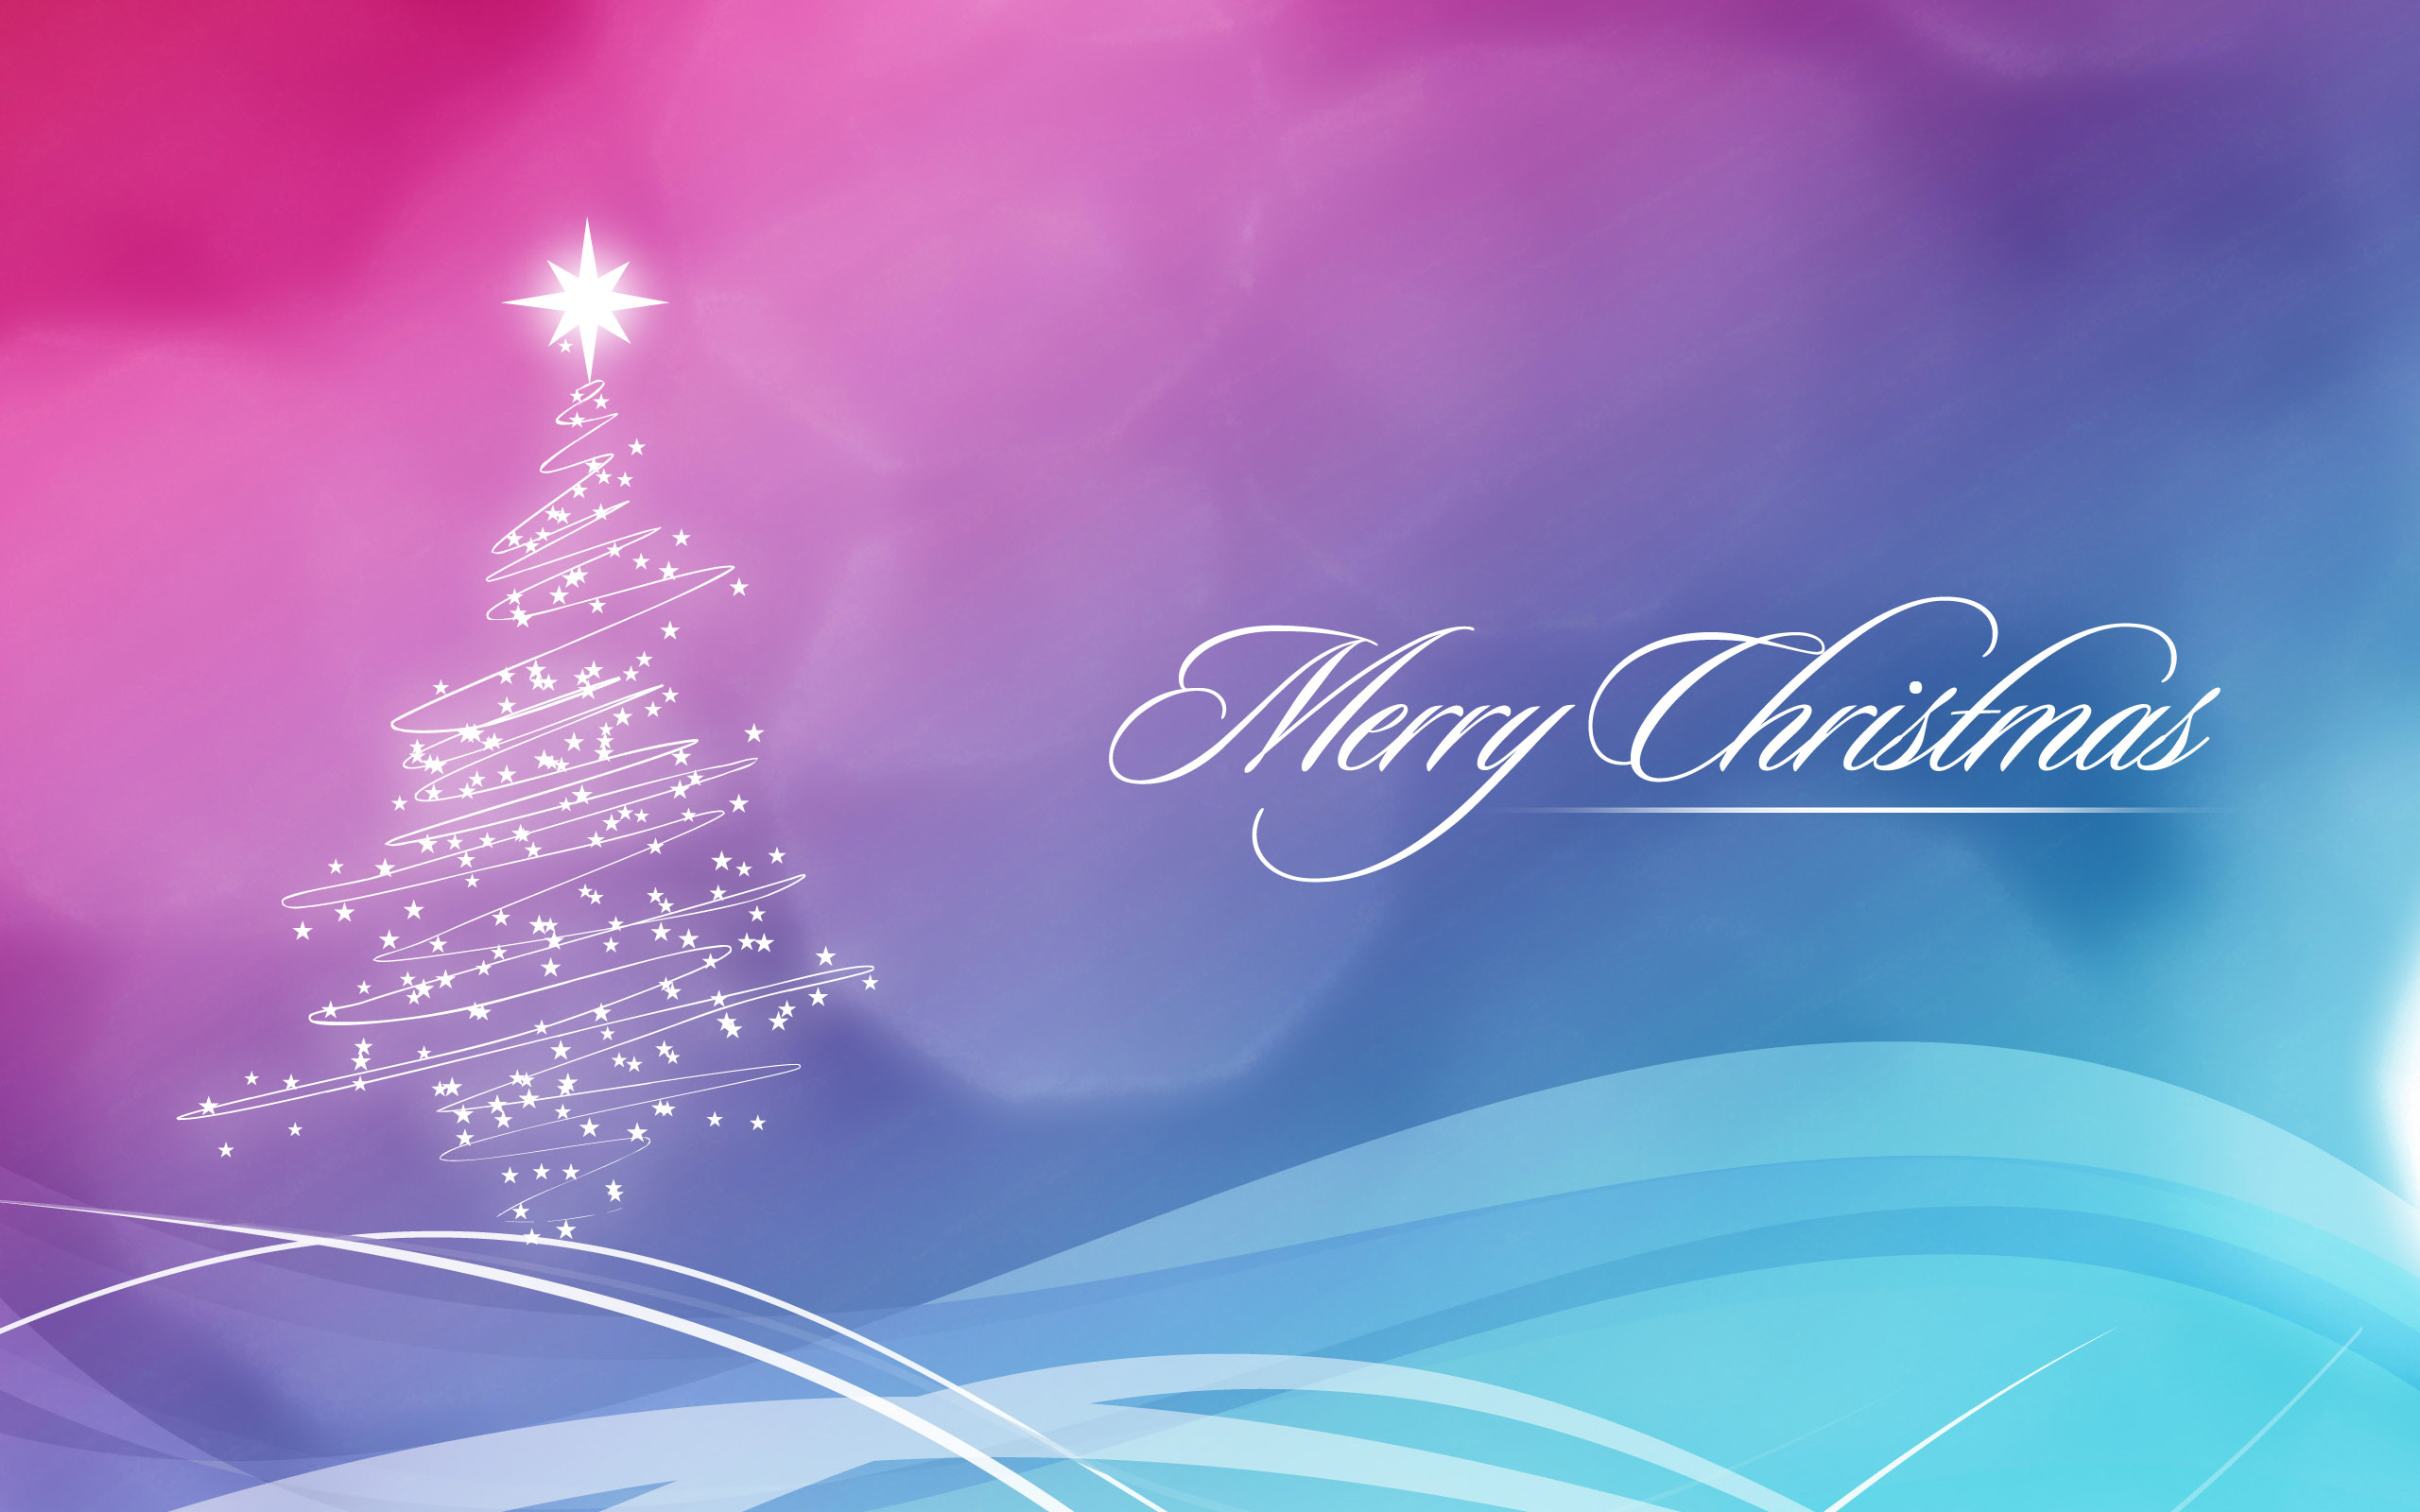 2015 Christmas computer background pictures - wallpapers, photos ...